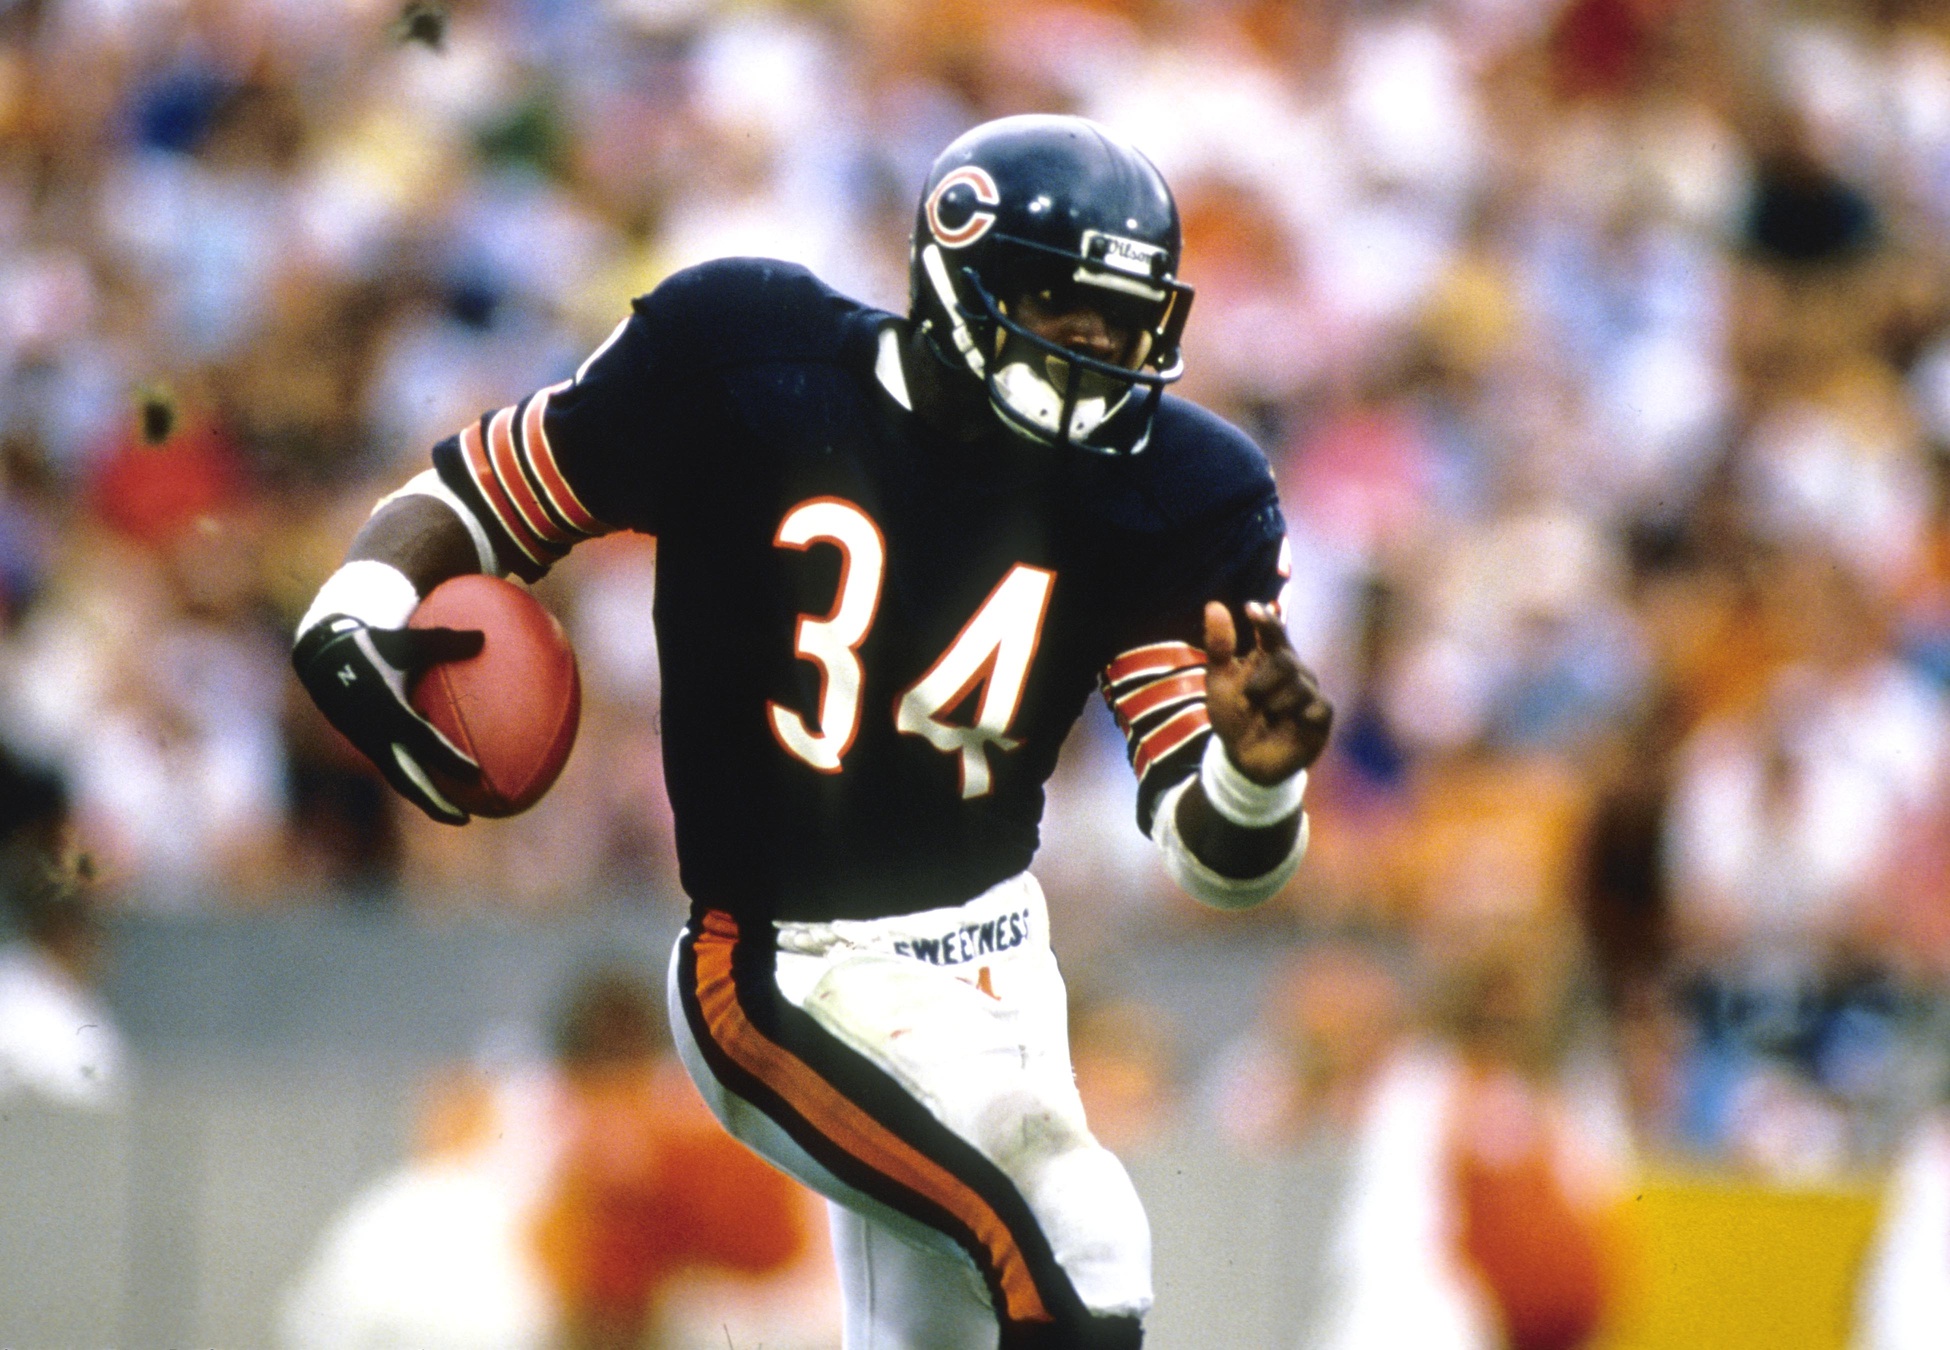 Ranking the 15 Best Chicago Bears Players of All Time